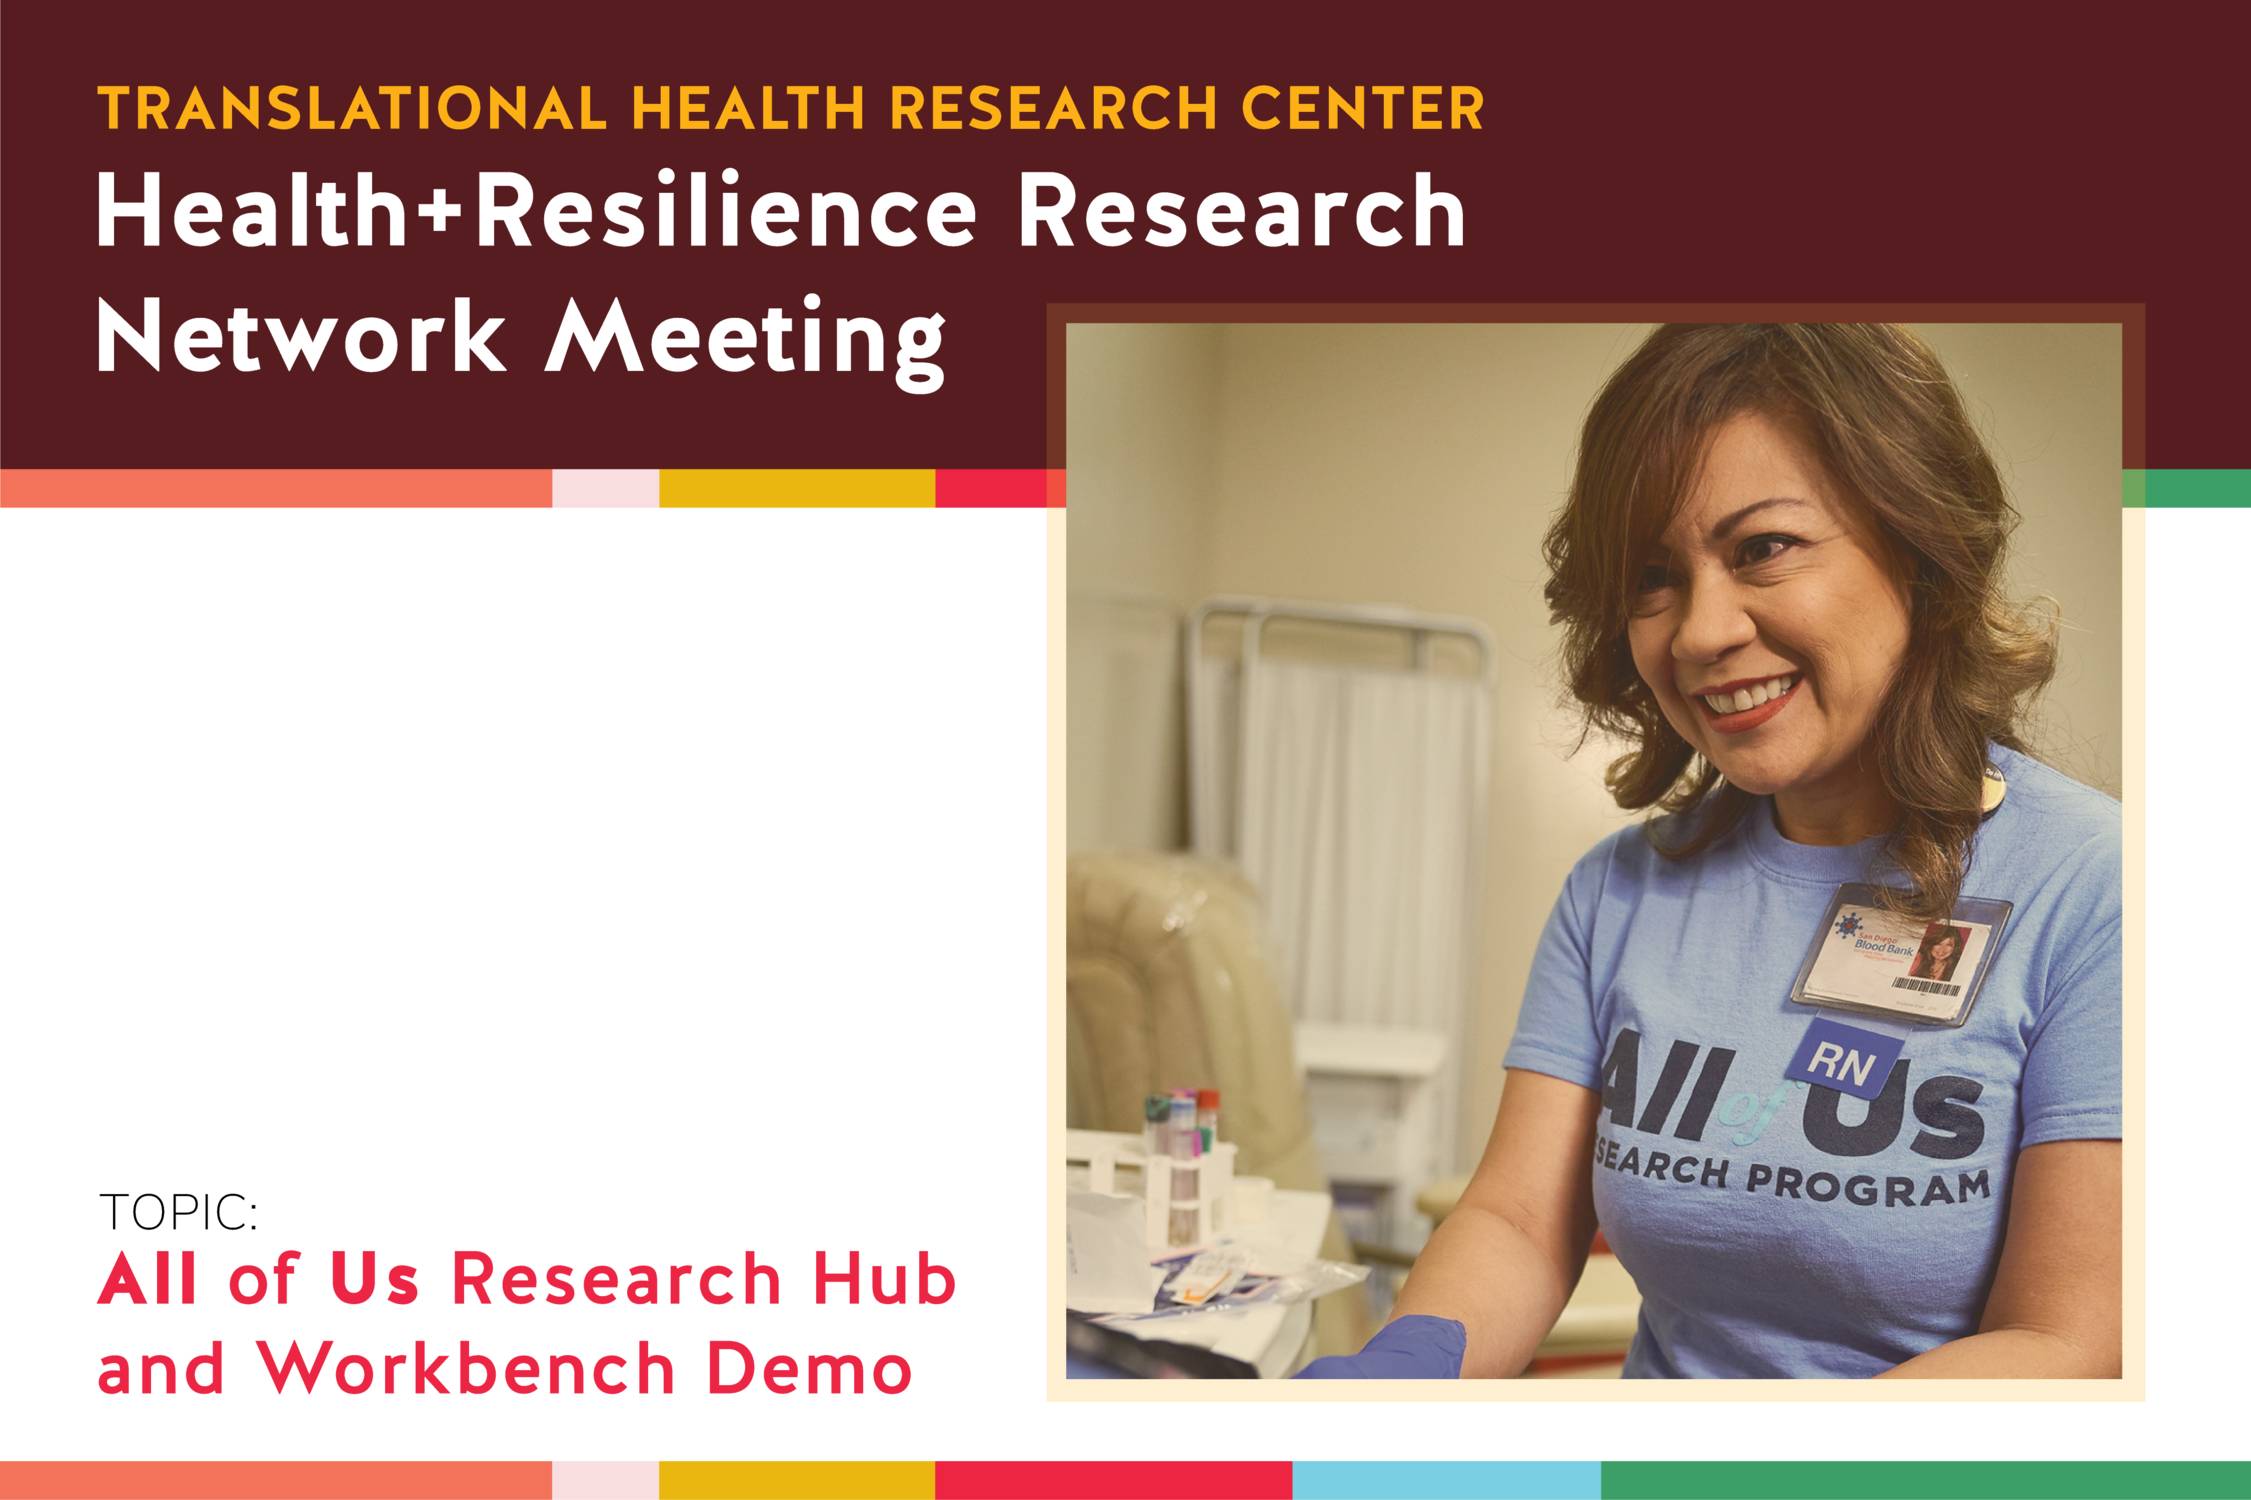 'THRC Health+Resilience Research network Meeting. Topic: All of Us Research Hub and Workbench Demo. Happening online on April 30, 2024 from 12pm-1pm. Please RSVP by April 26, 2024 at HealthResearch@txstate.edu' 